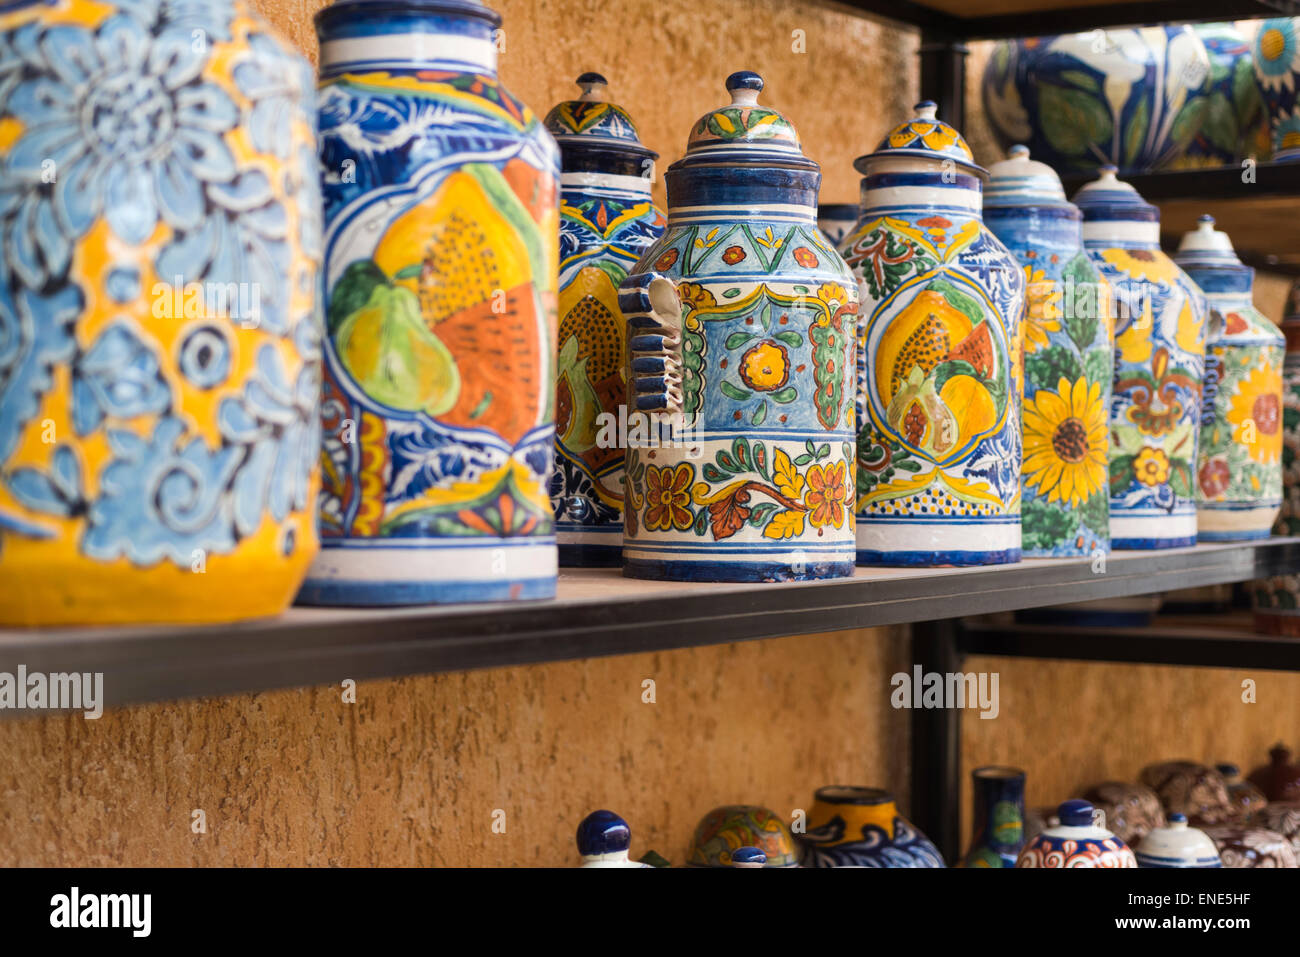 Urns and vases on display in Mexico pottery shop Stock Photo